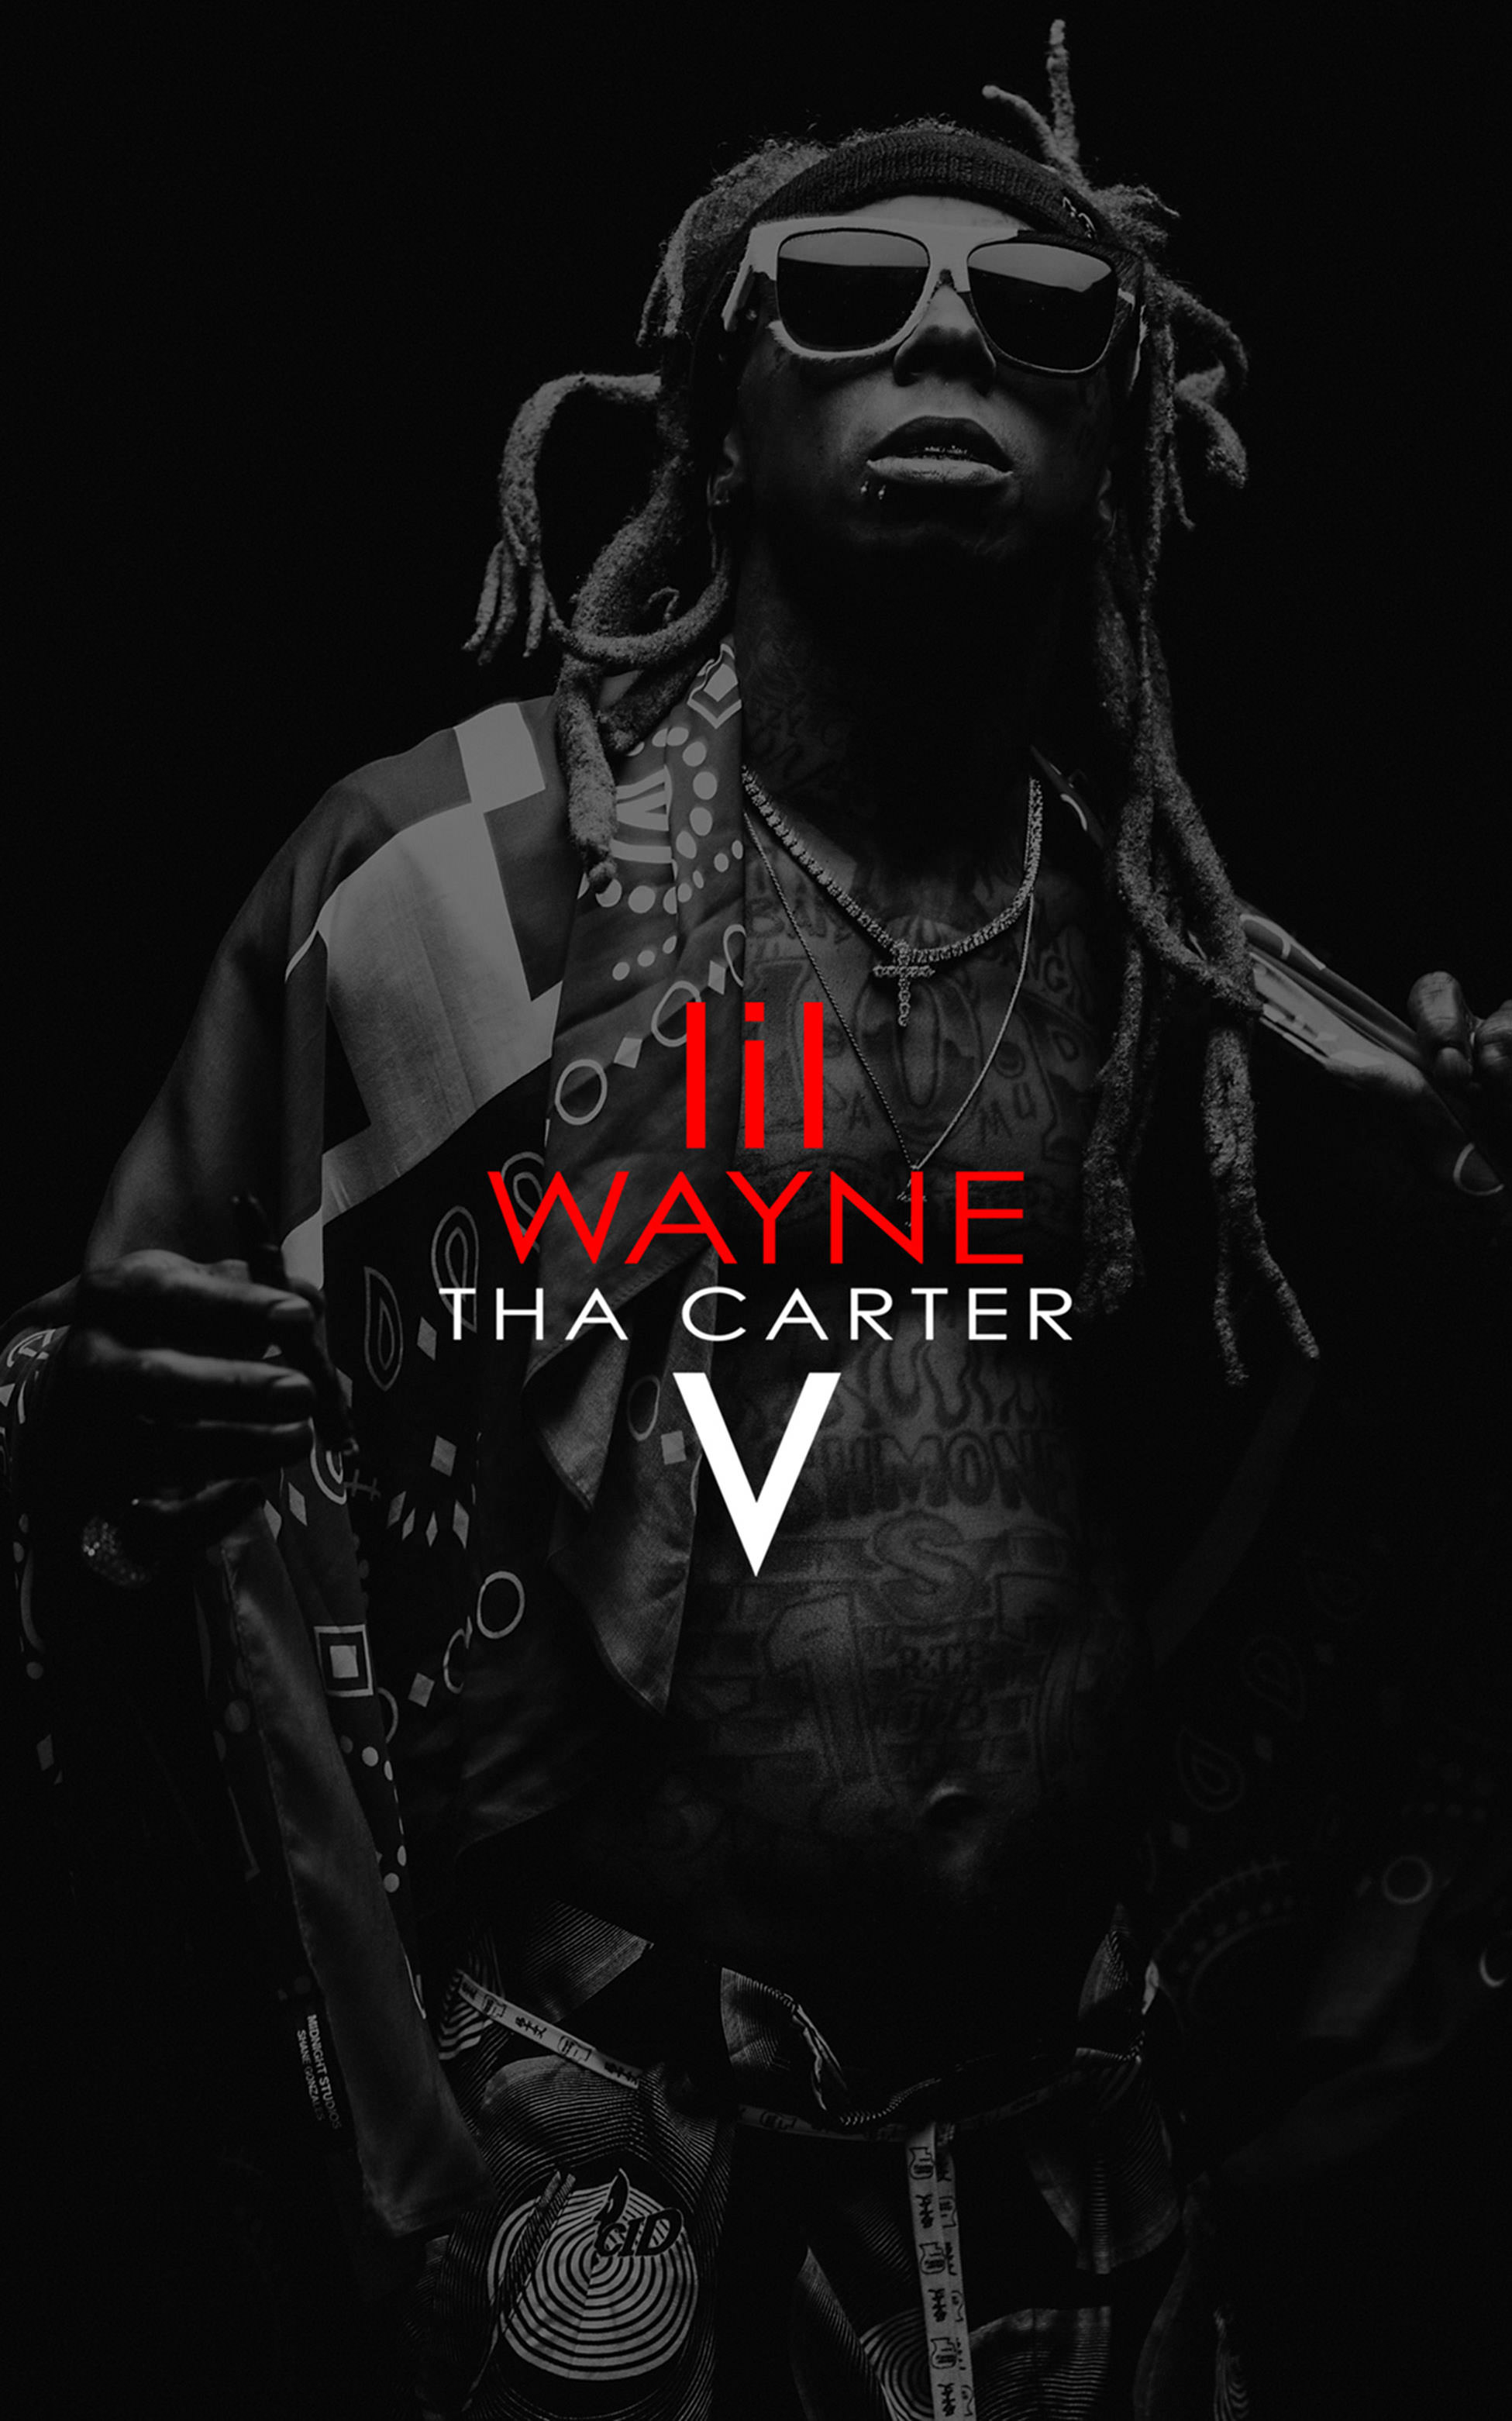 Here are some mobile wallpaper for C5 from Lil Wayne & the Zedge app